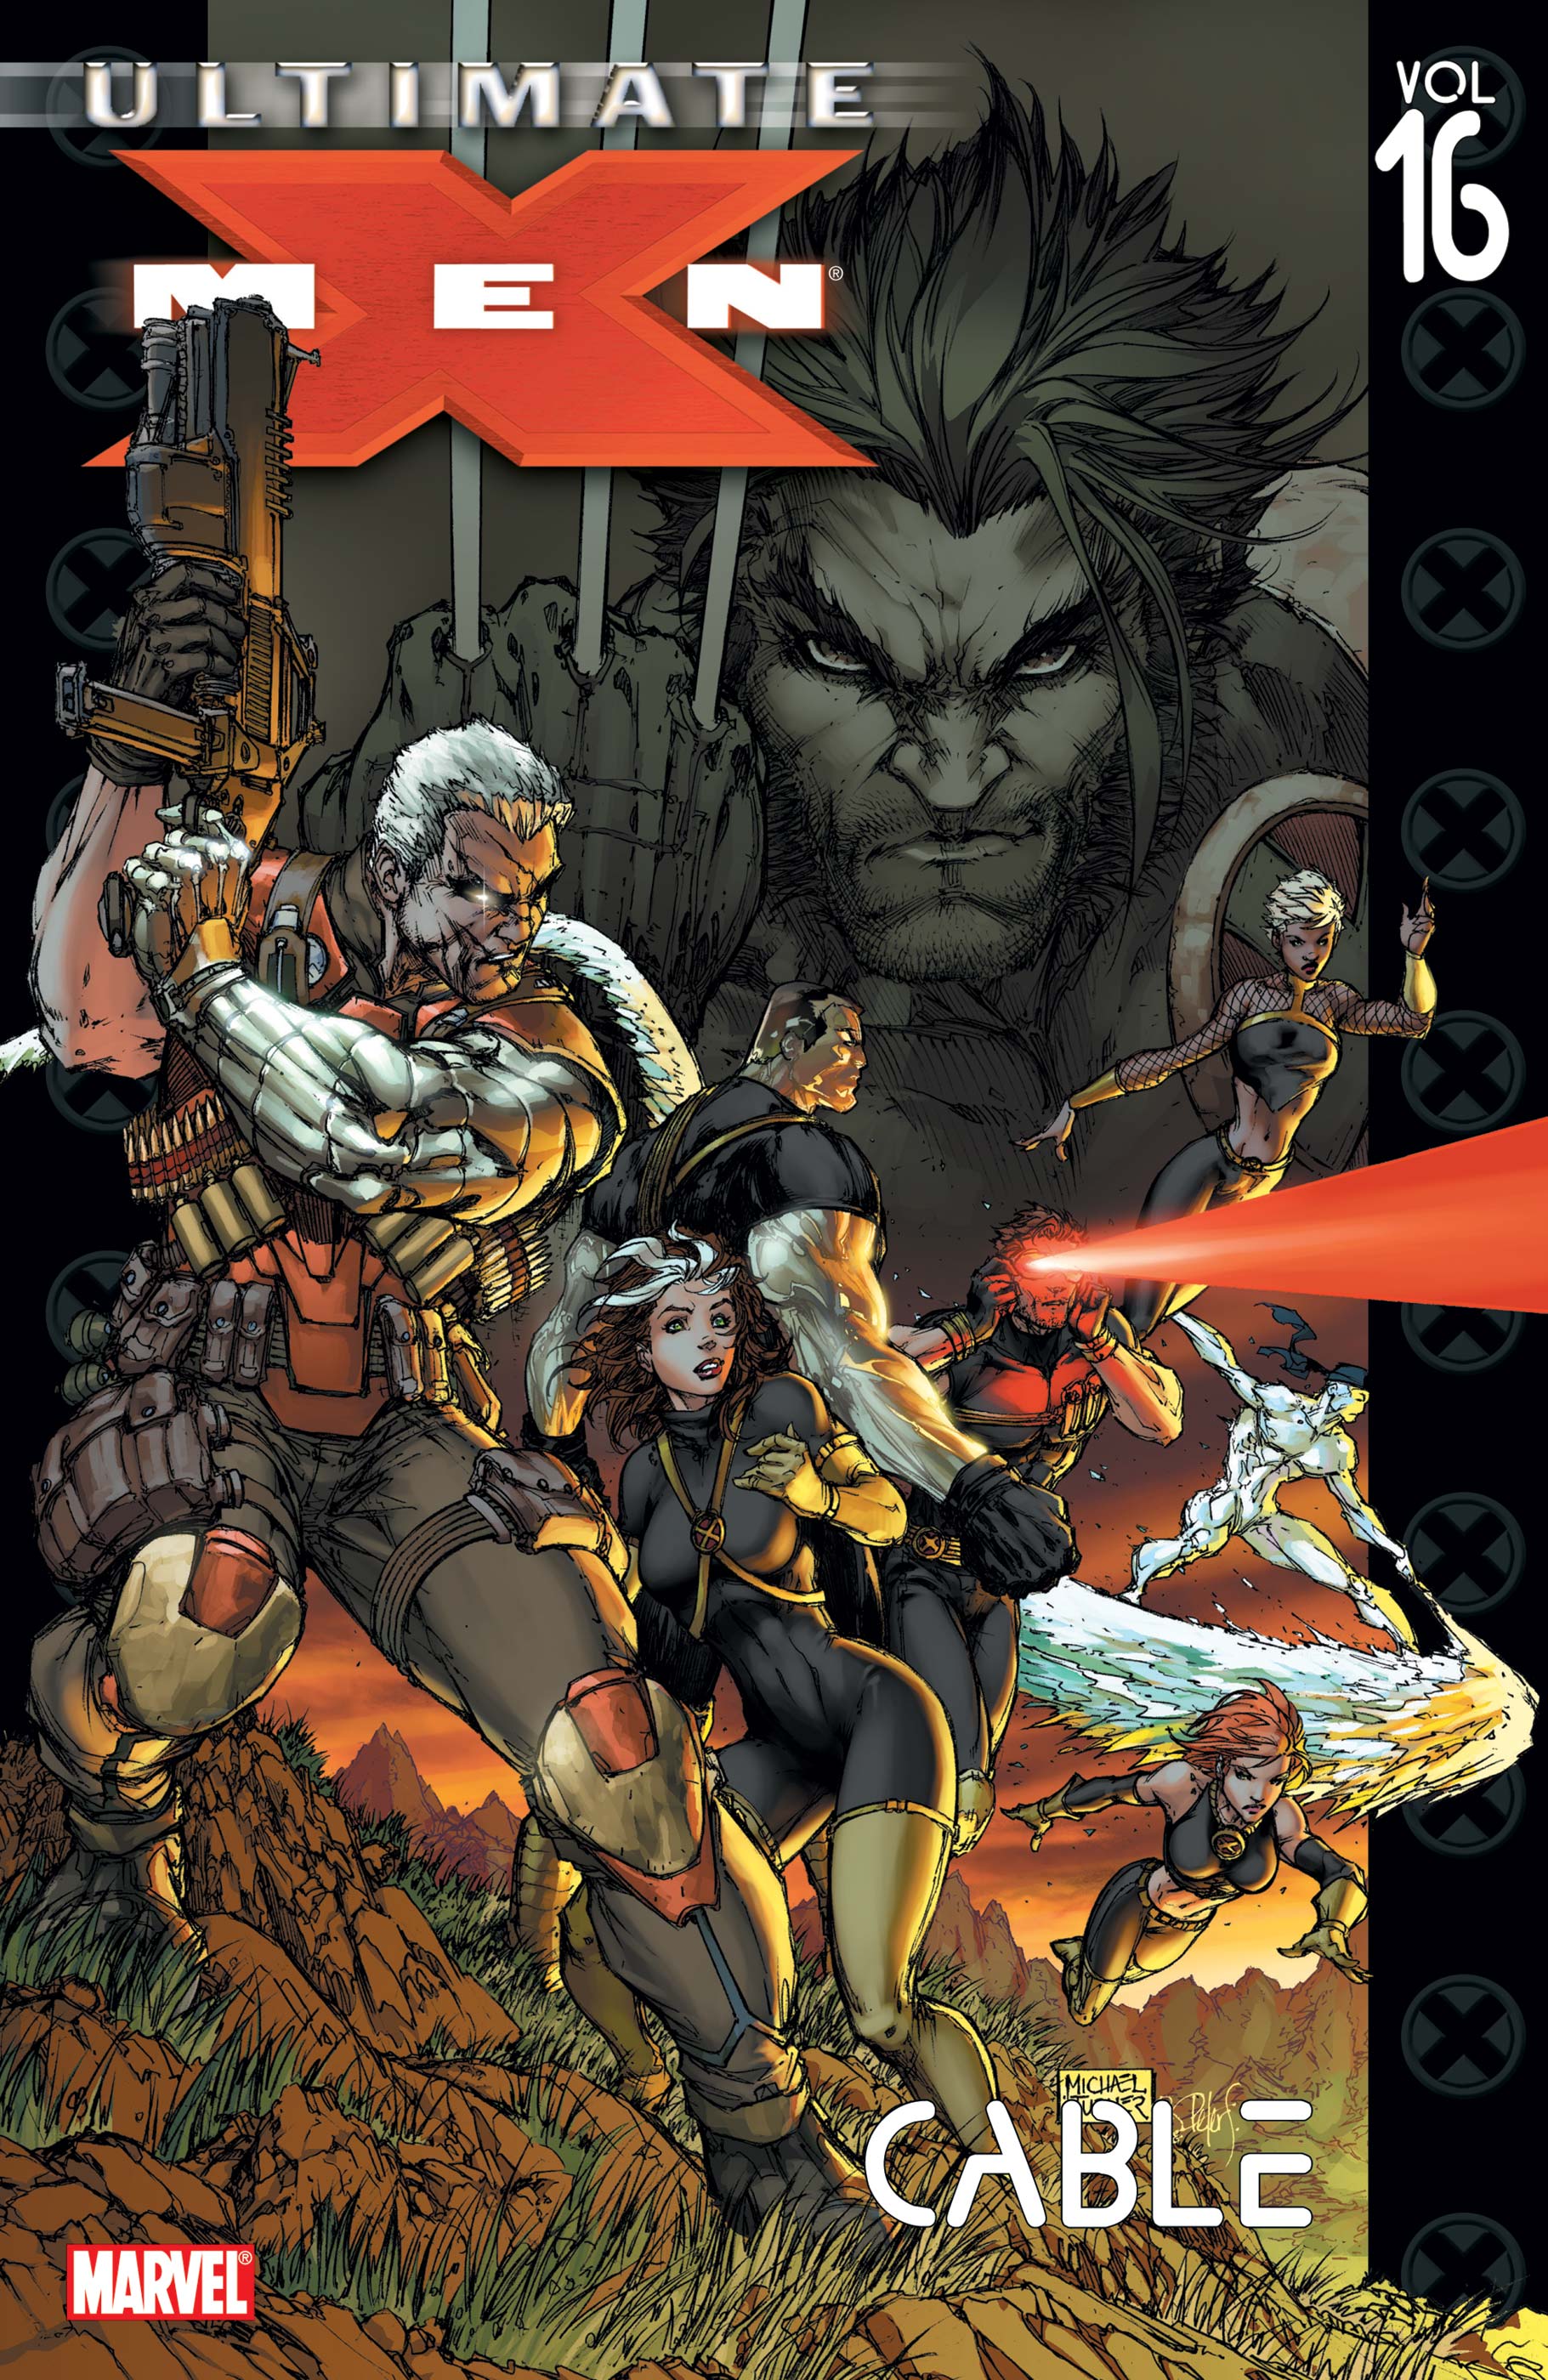 ULTIMATE X-MEN VOL. 16: CABLE TPB (Trade Paperback)